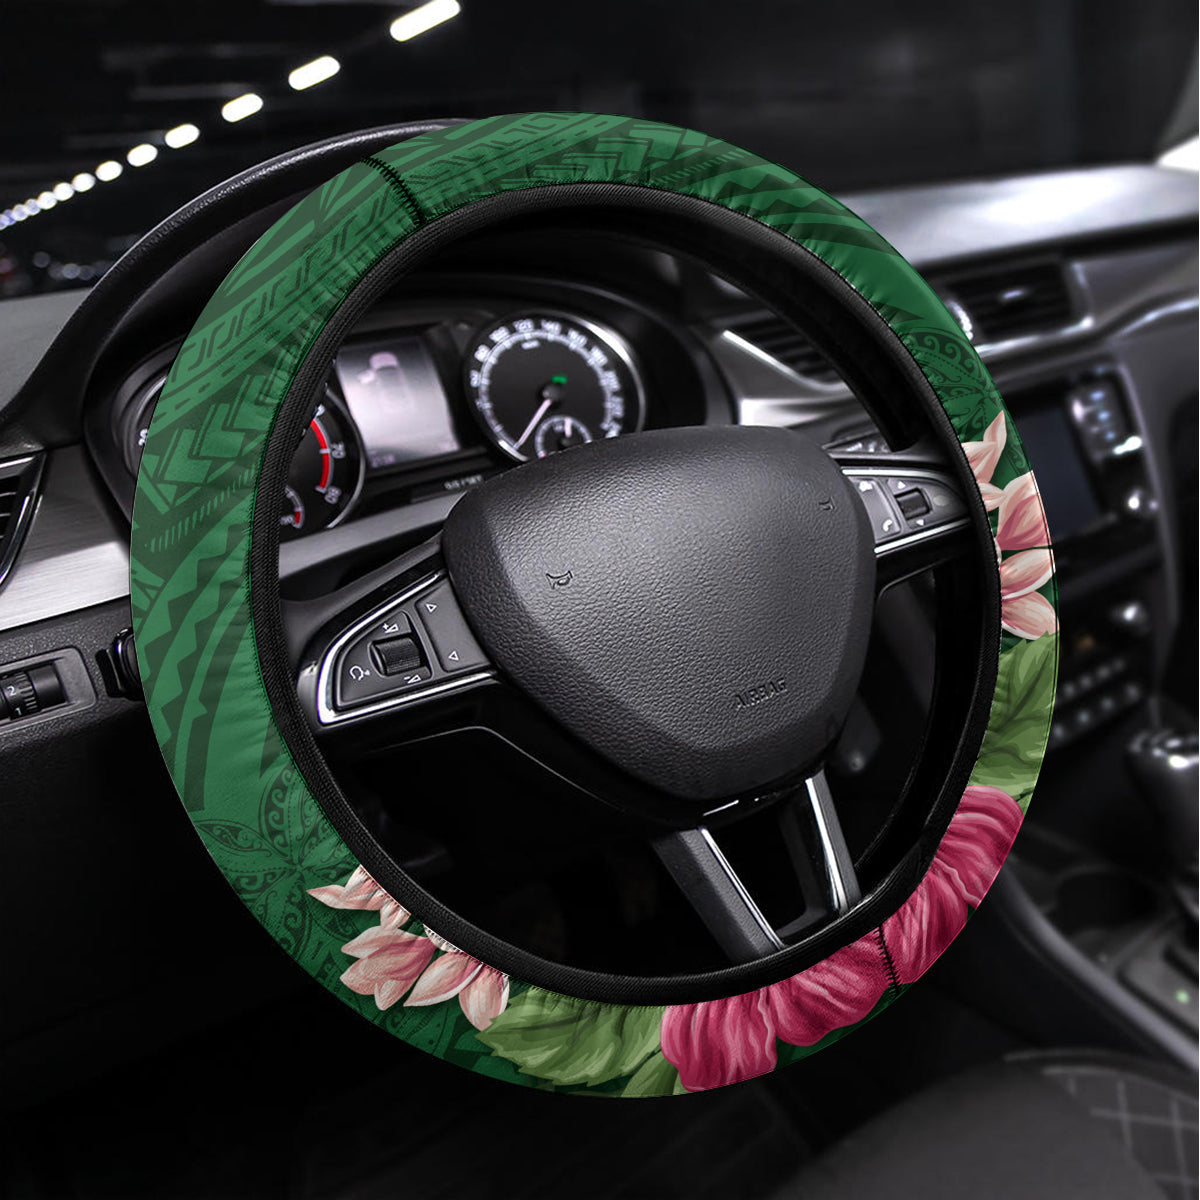 Manu'a Cession Day 120th Anniversary Steering Wheel Cover Polynesian Pattern and Hibiscus Flower